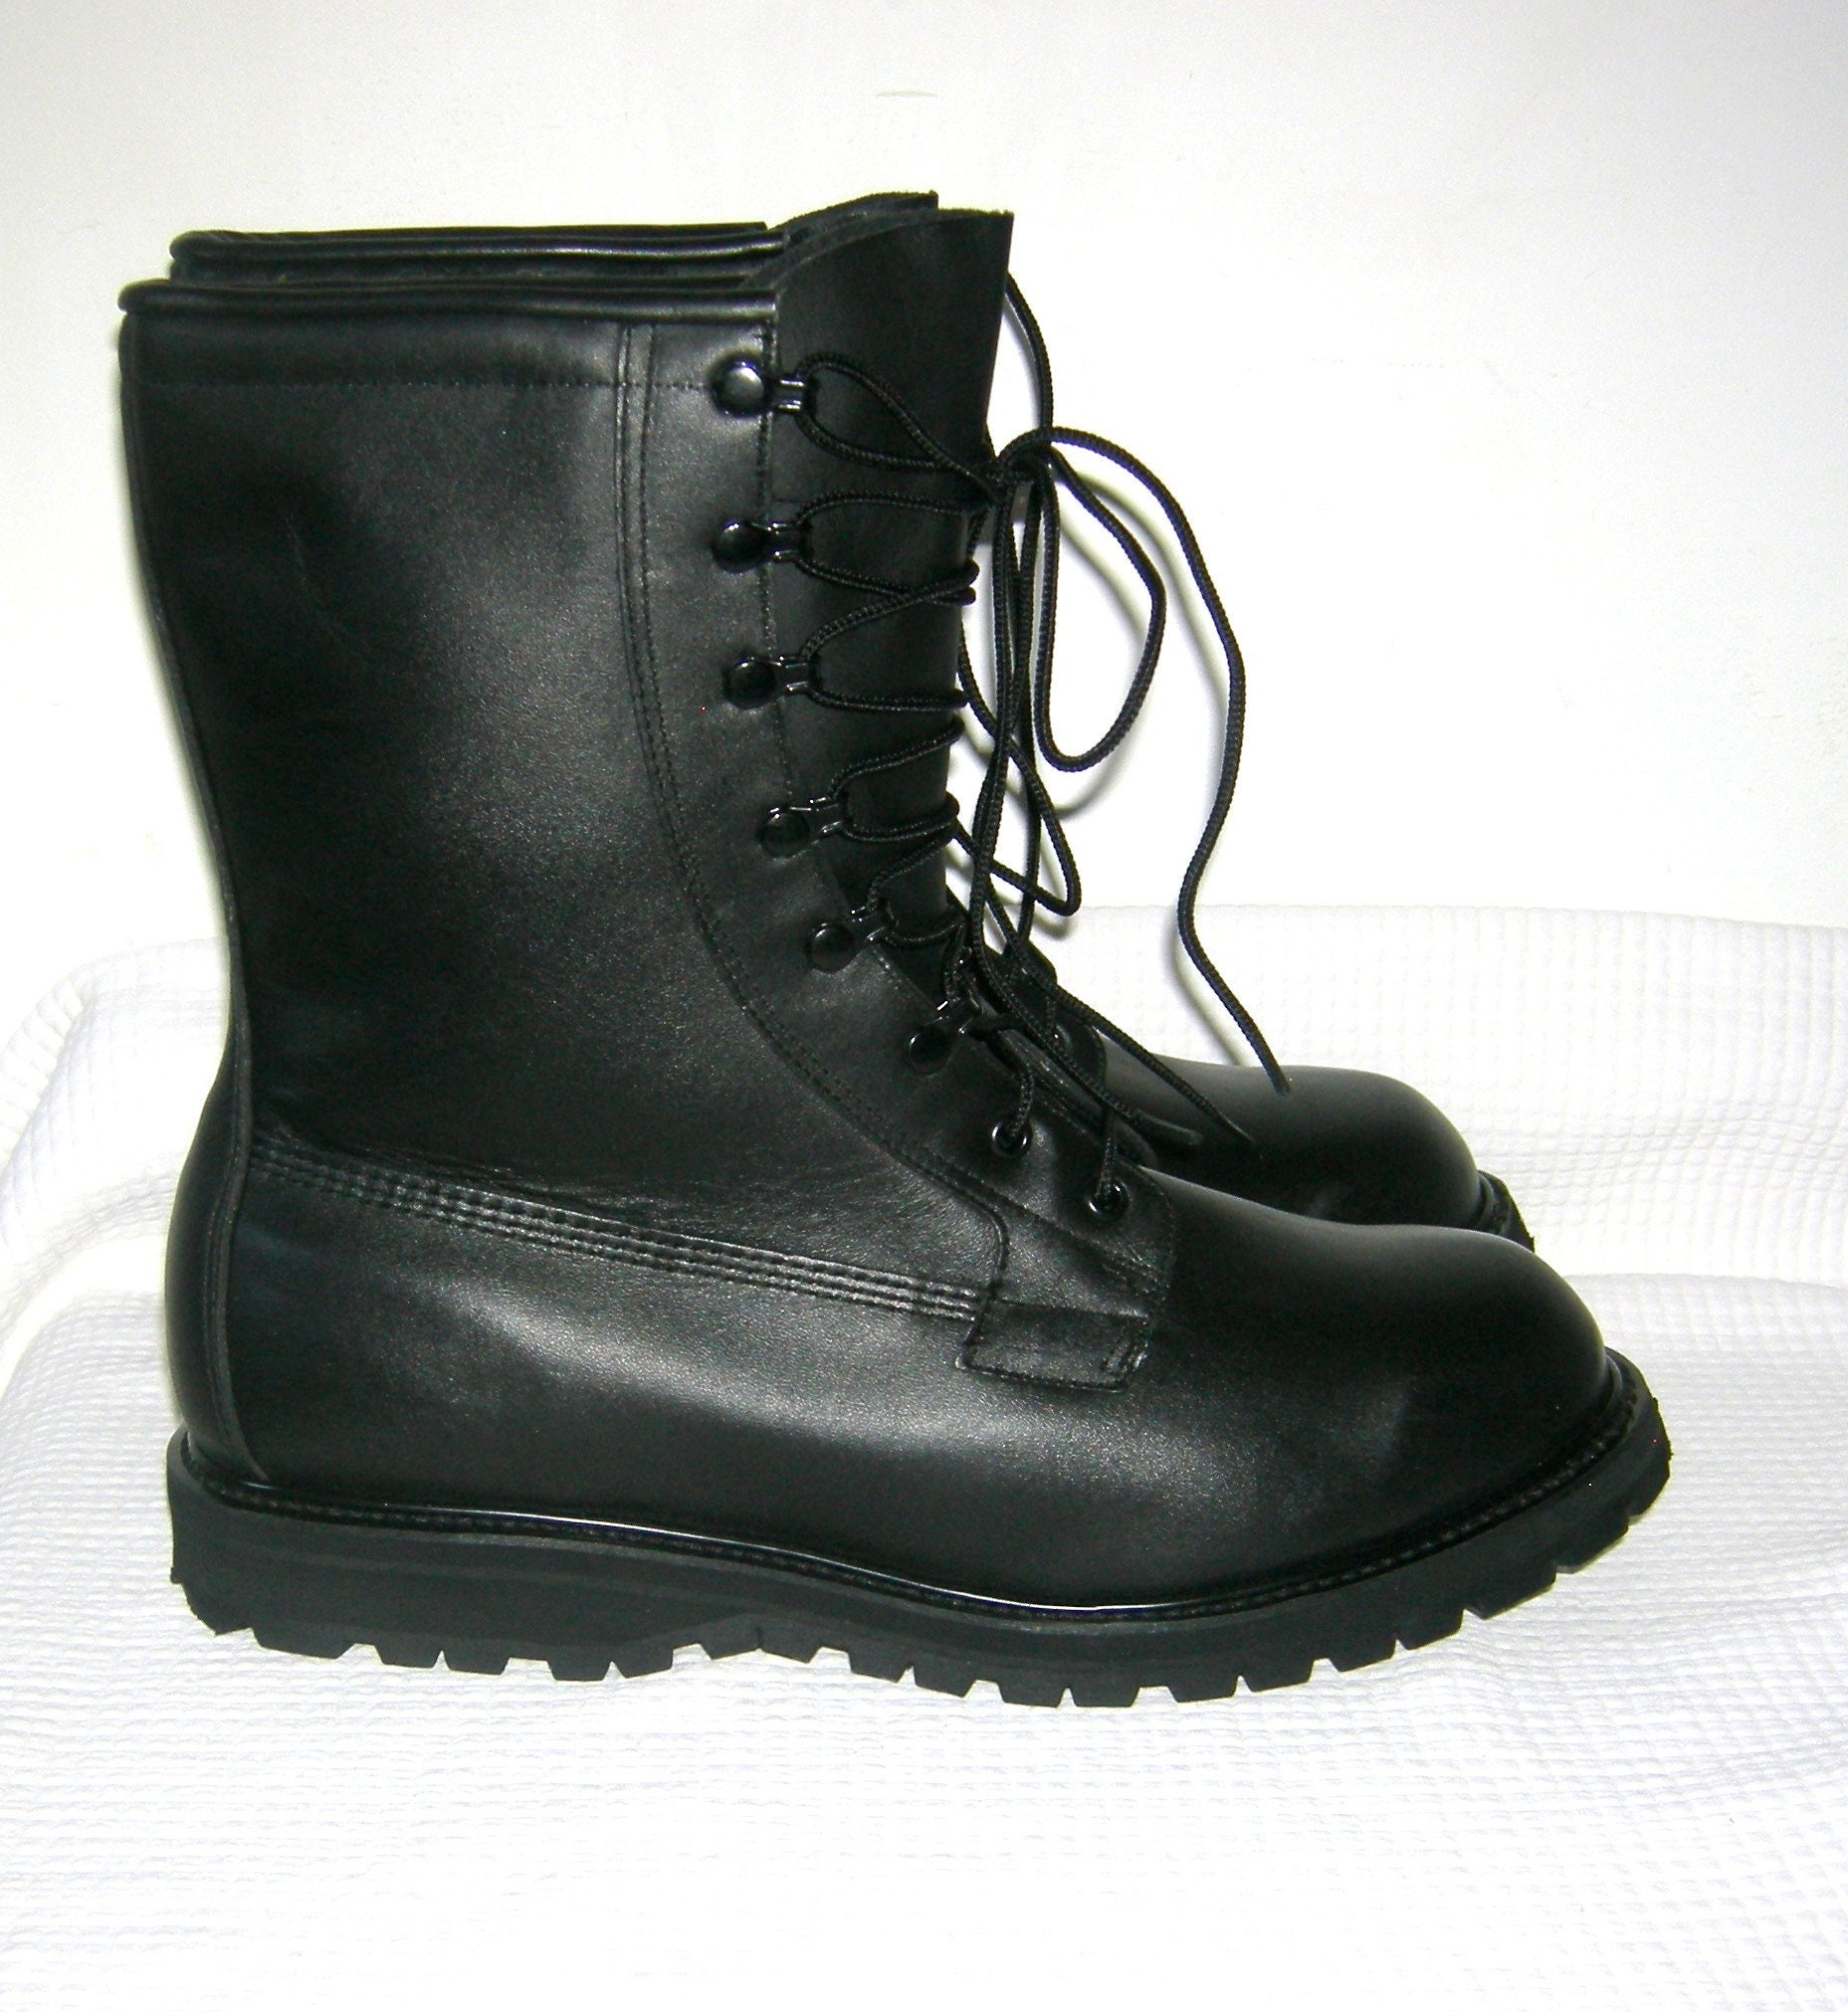 Military Patchwork combat boots